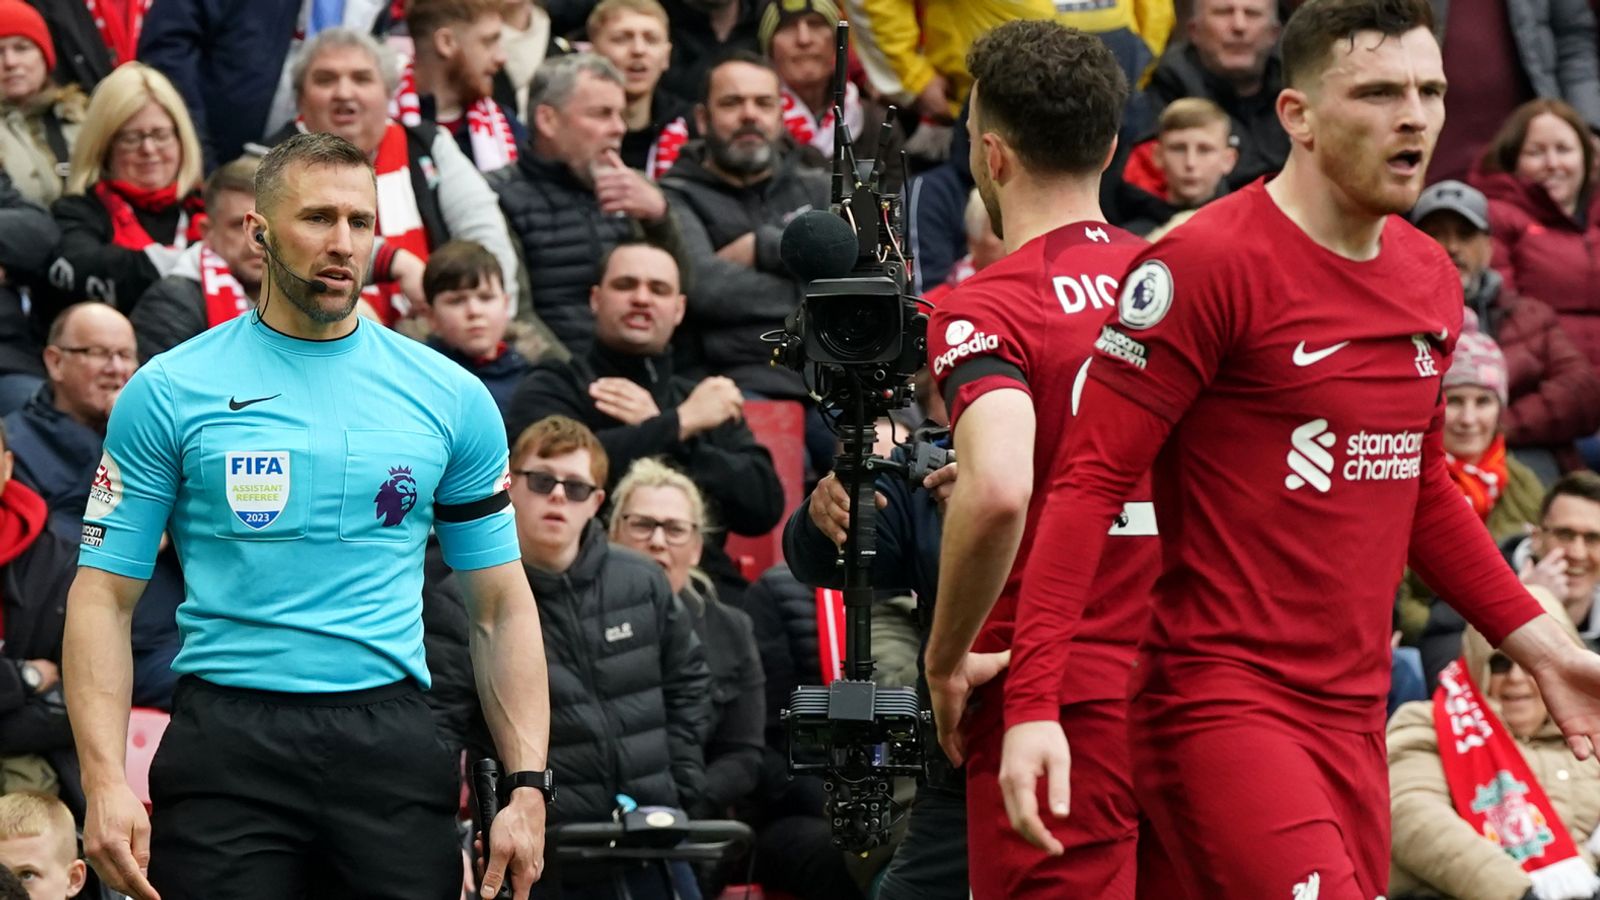 Constantine Hatzidakis apologises to Andy Robertson after 'elbow' with official to face no FA action